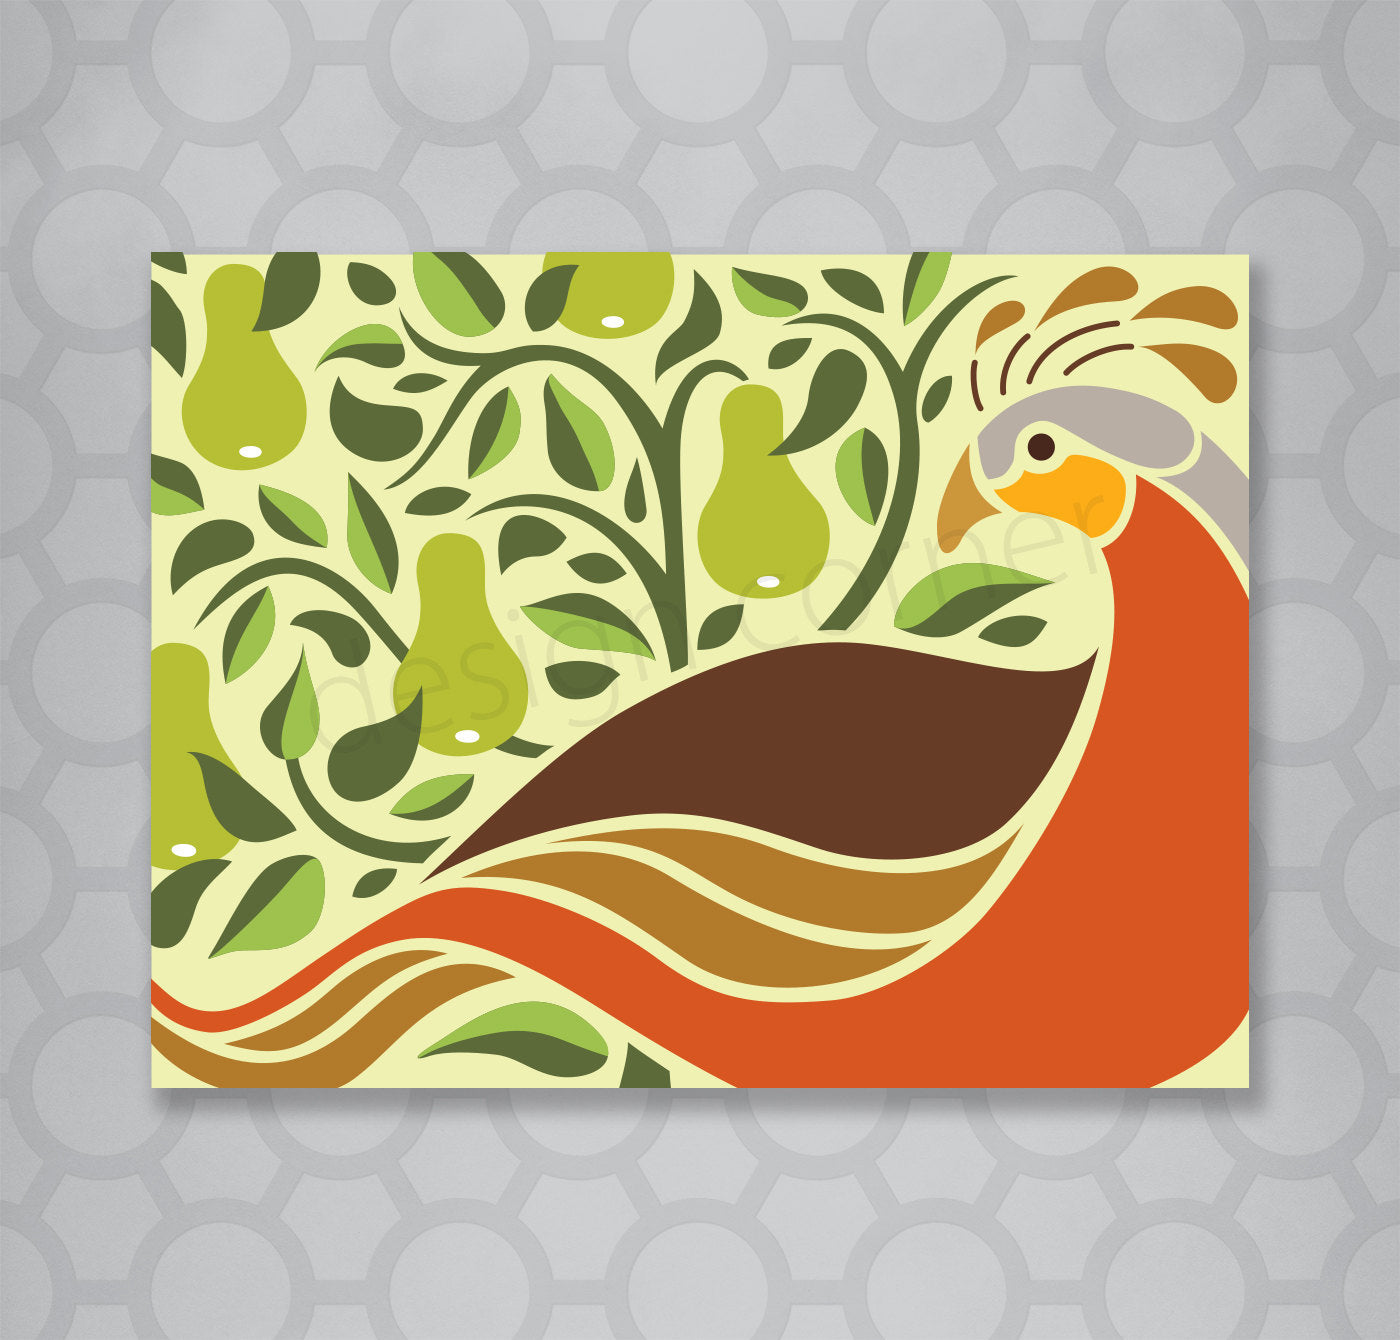 Colourful illustration of a graphic partridge in a pear tree on a Christmas card.